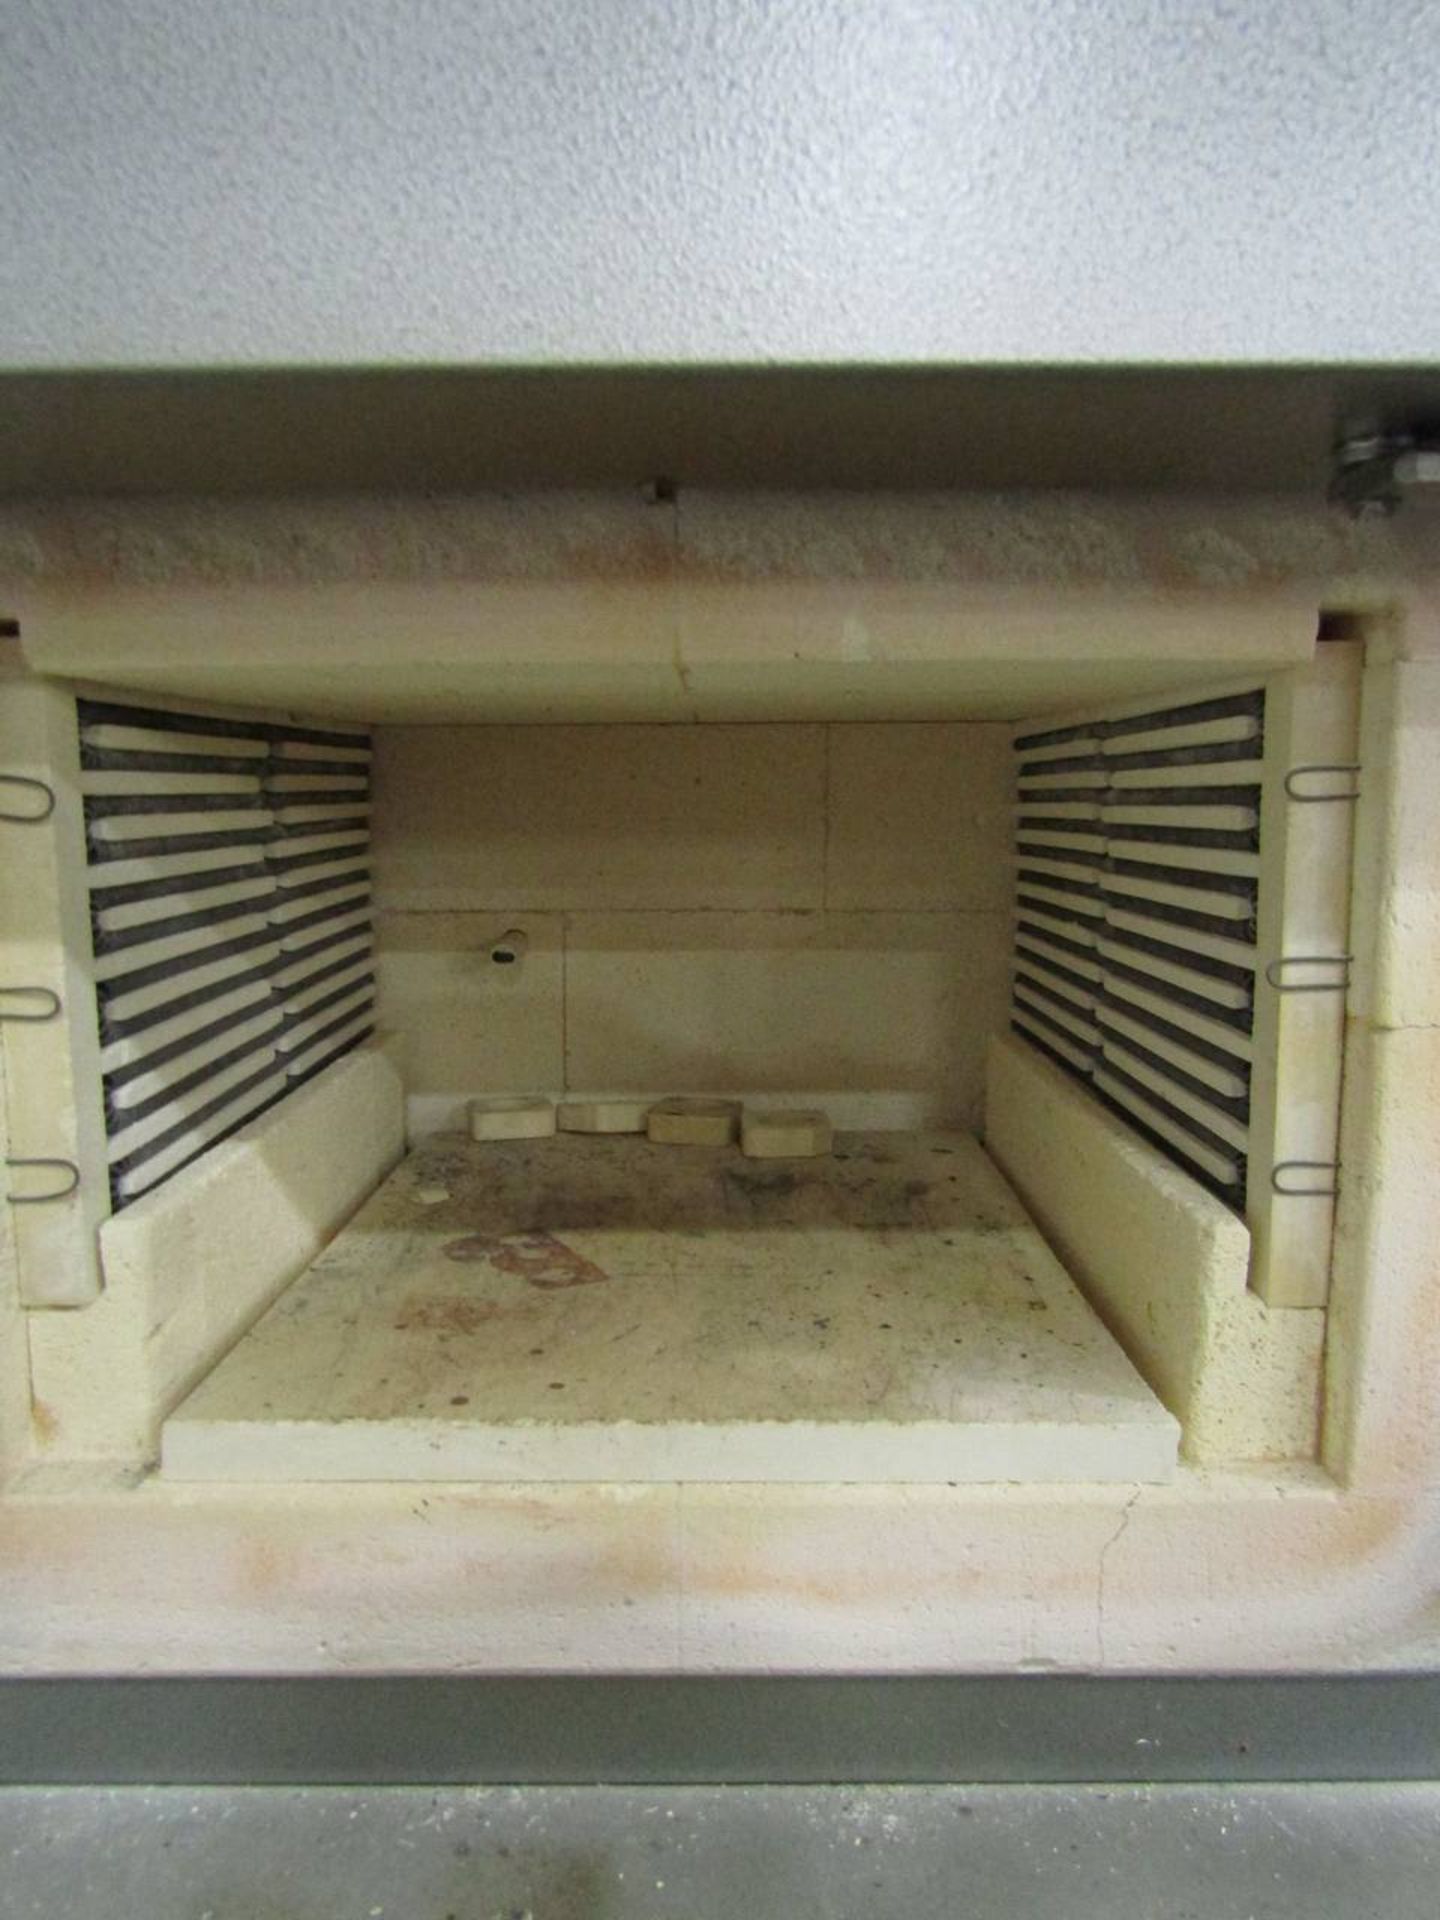 Cress C136/PM6 Electric Furnace - Image 6 of 8